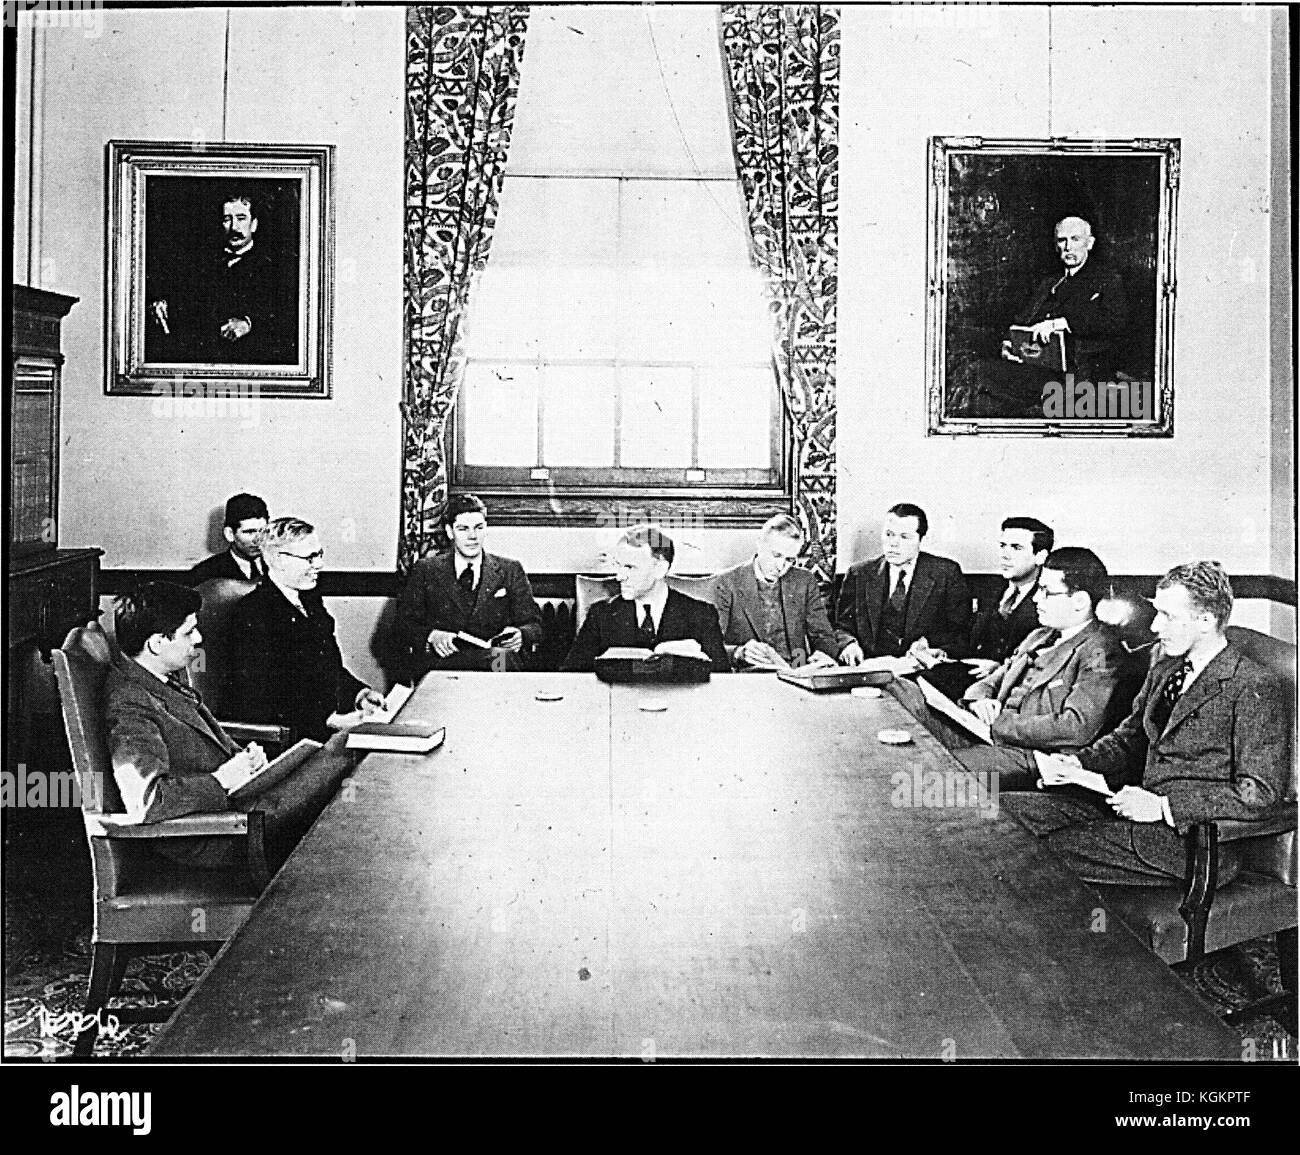 A history class at the Johns Hopkins University in Baltimore, Maryland; eleven men sitting around wooden table; portraits of JM Vincent and HB Adams hanging on wall, 1920. Stock Photo